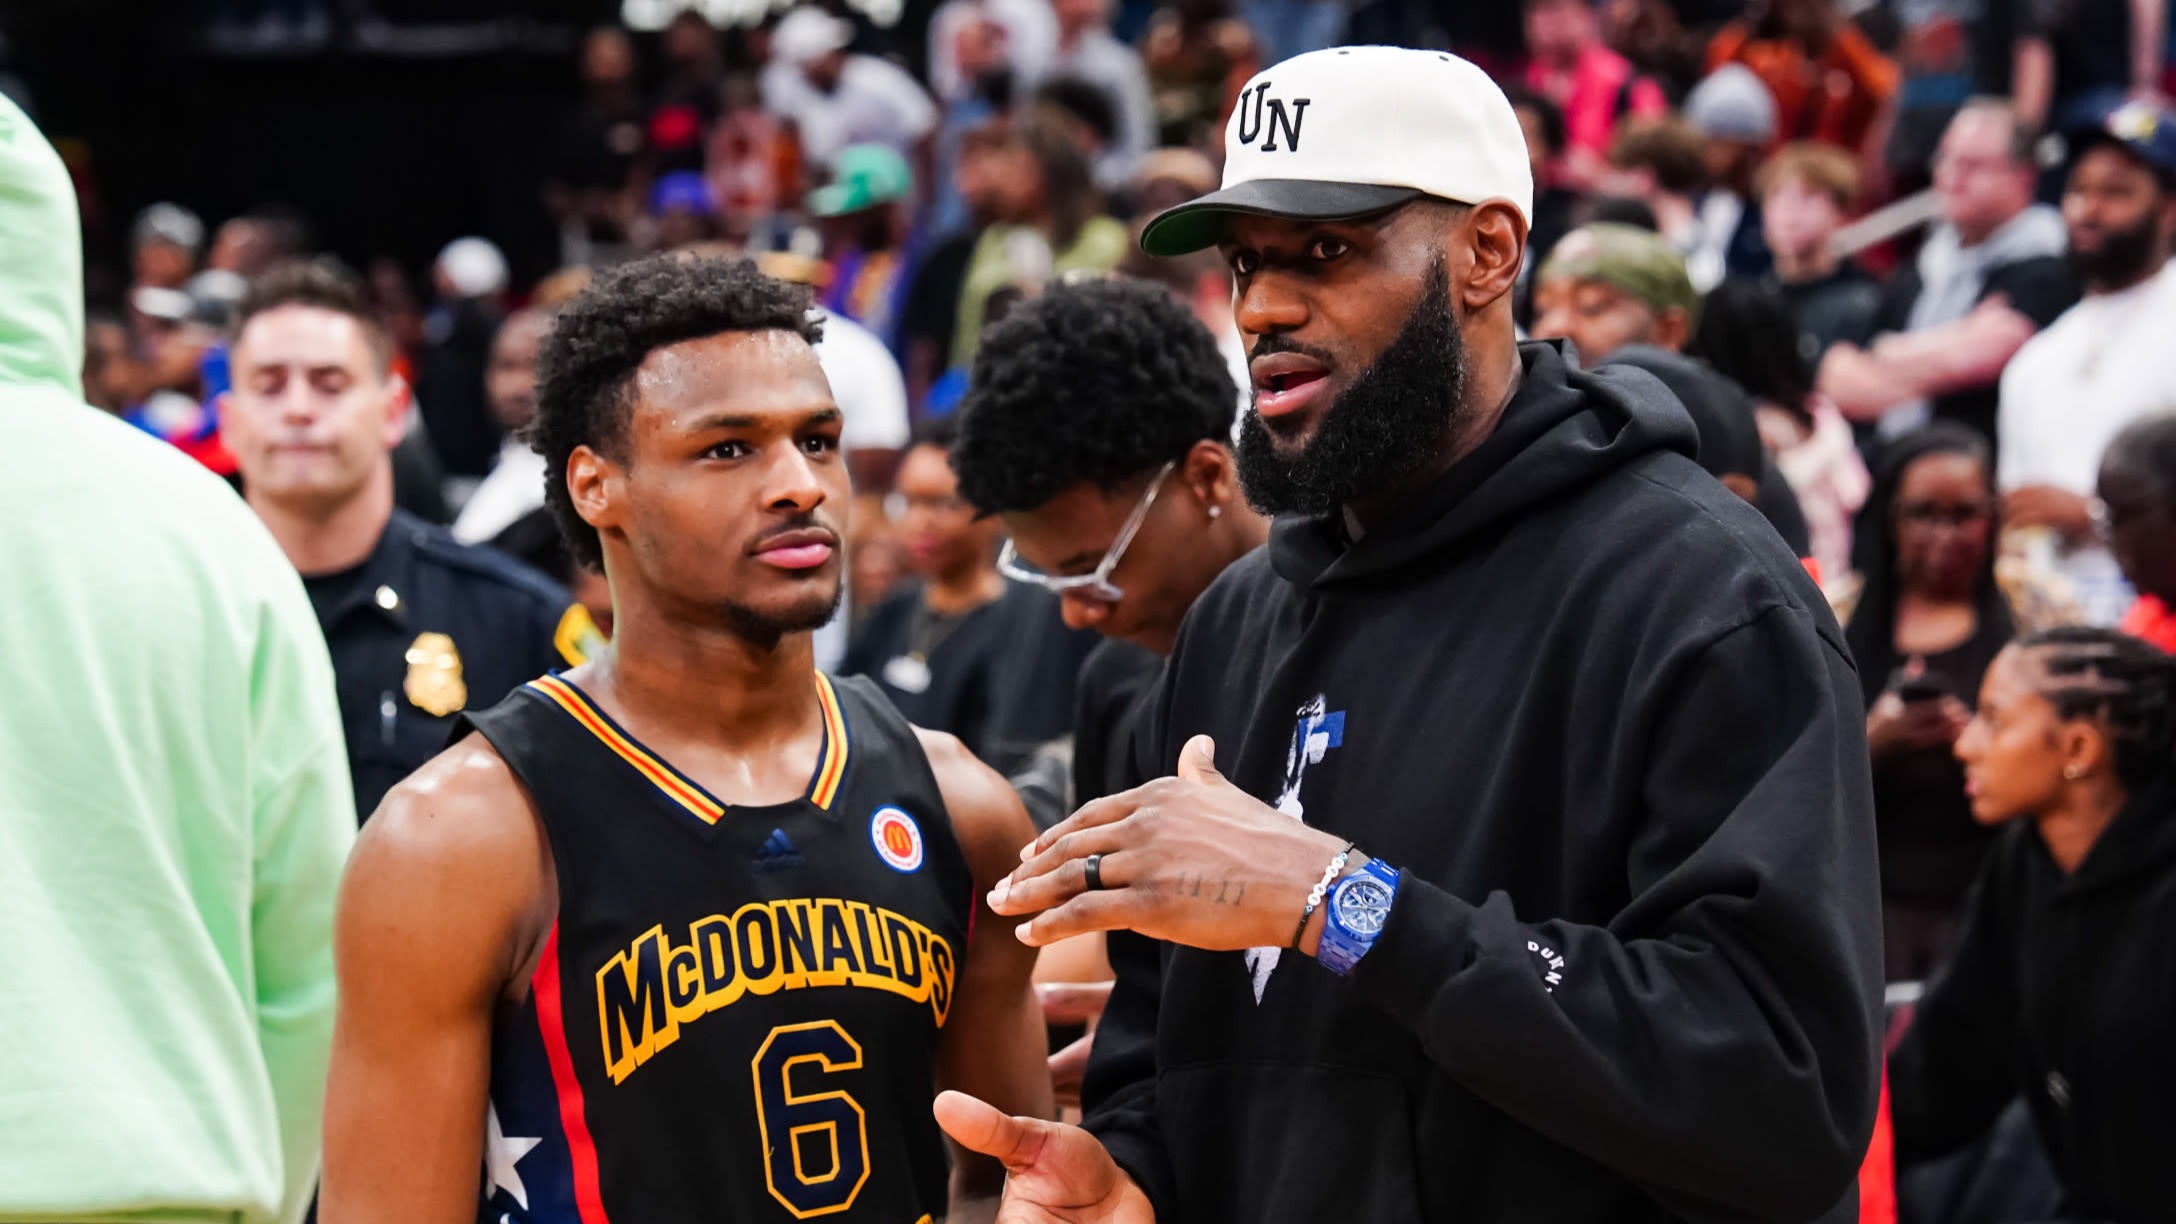 LeBron James reacts to Bronny James dunking over Bryce James at McDonald's  All-American JamFest 